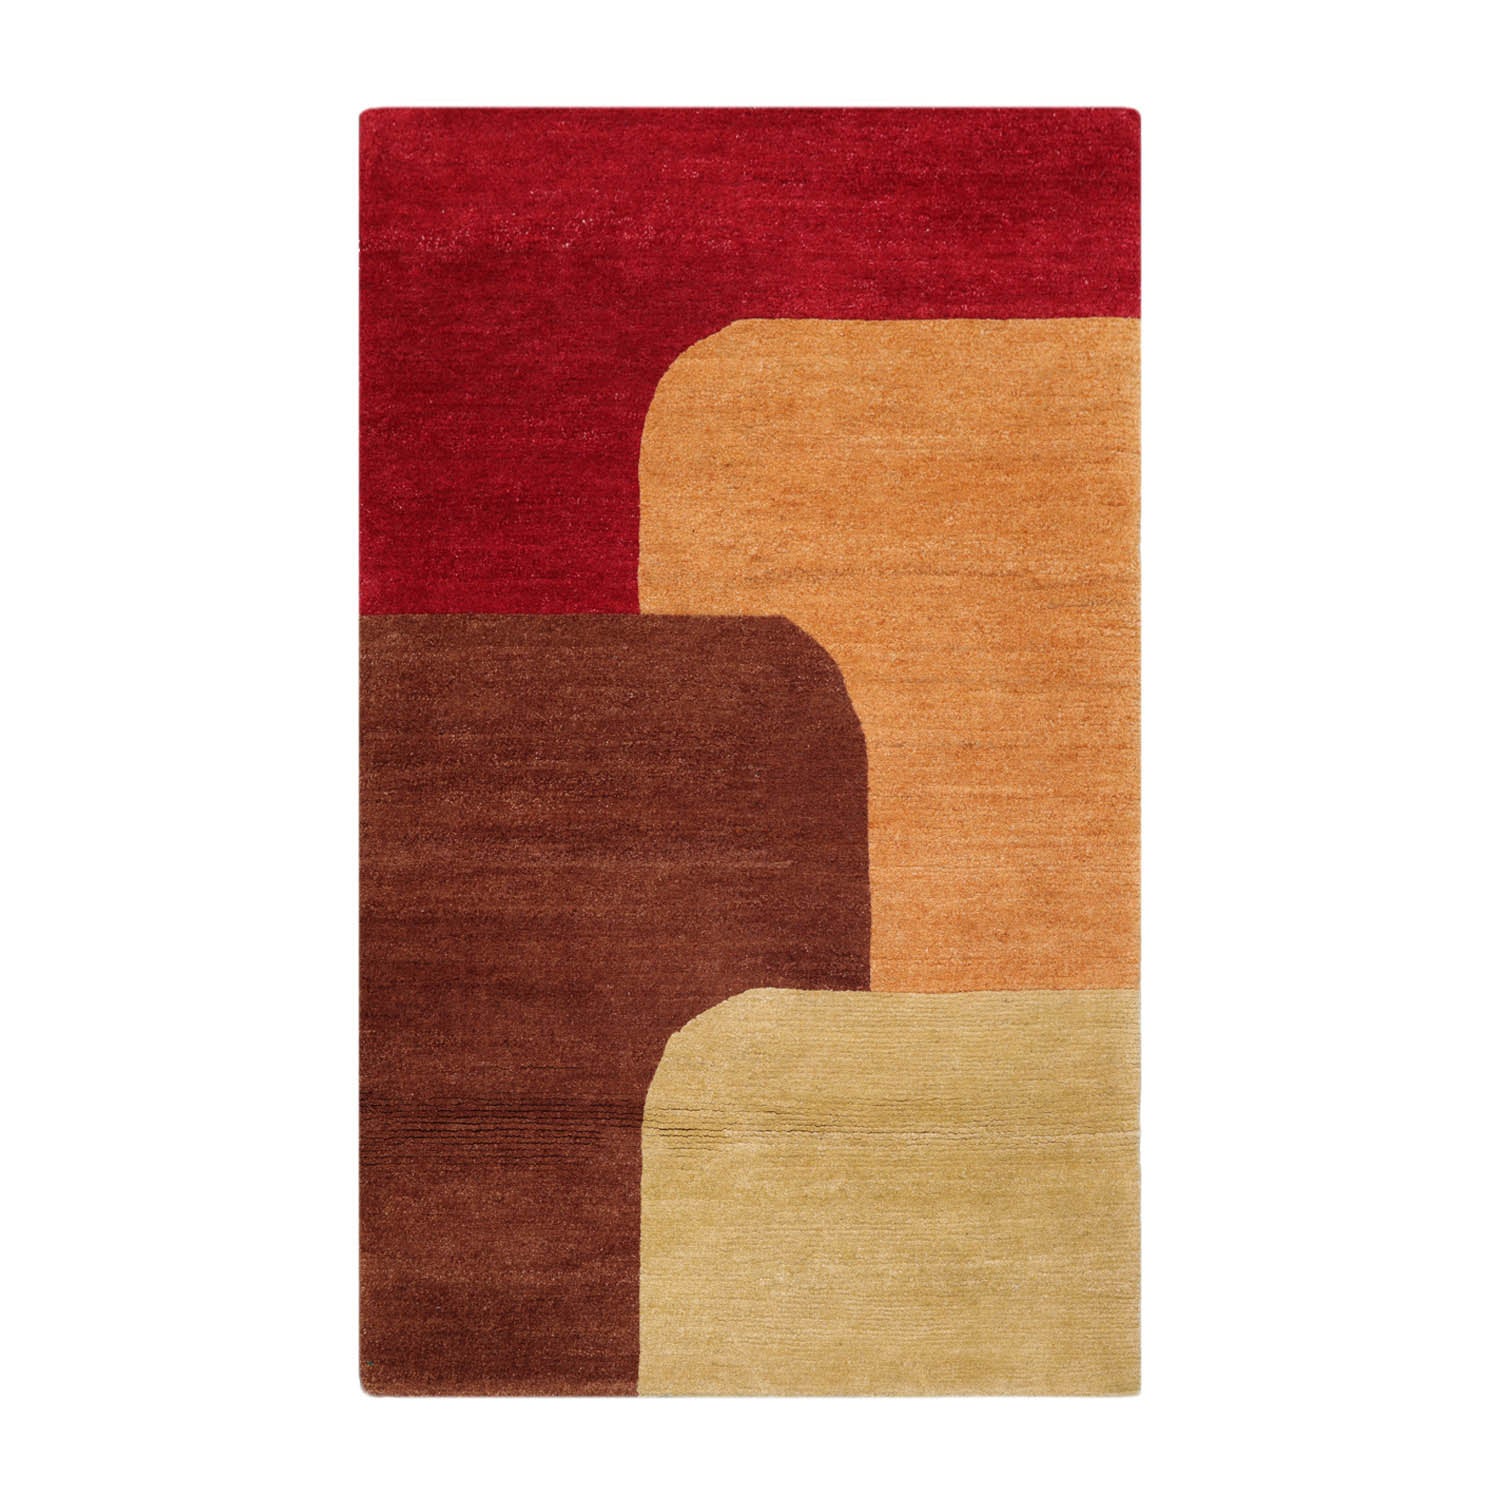 Dibbell 3x5 Michaelian & Kohlberg Hand Knotted Contemporary Abstract Wool Oriental Area Rug Red